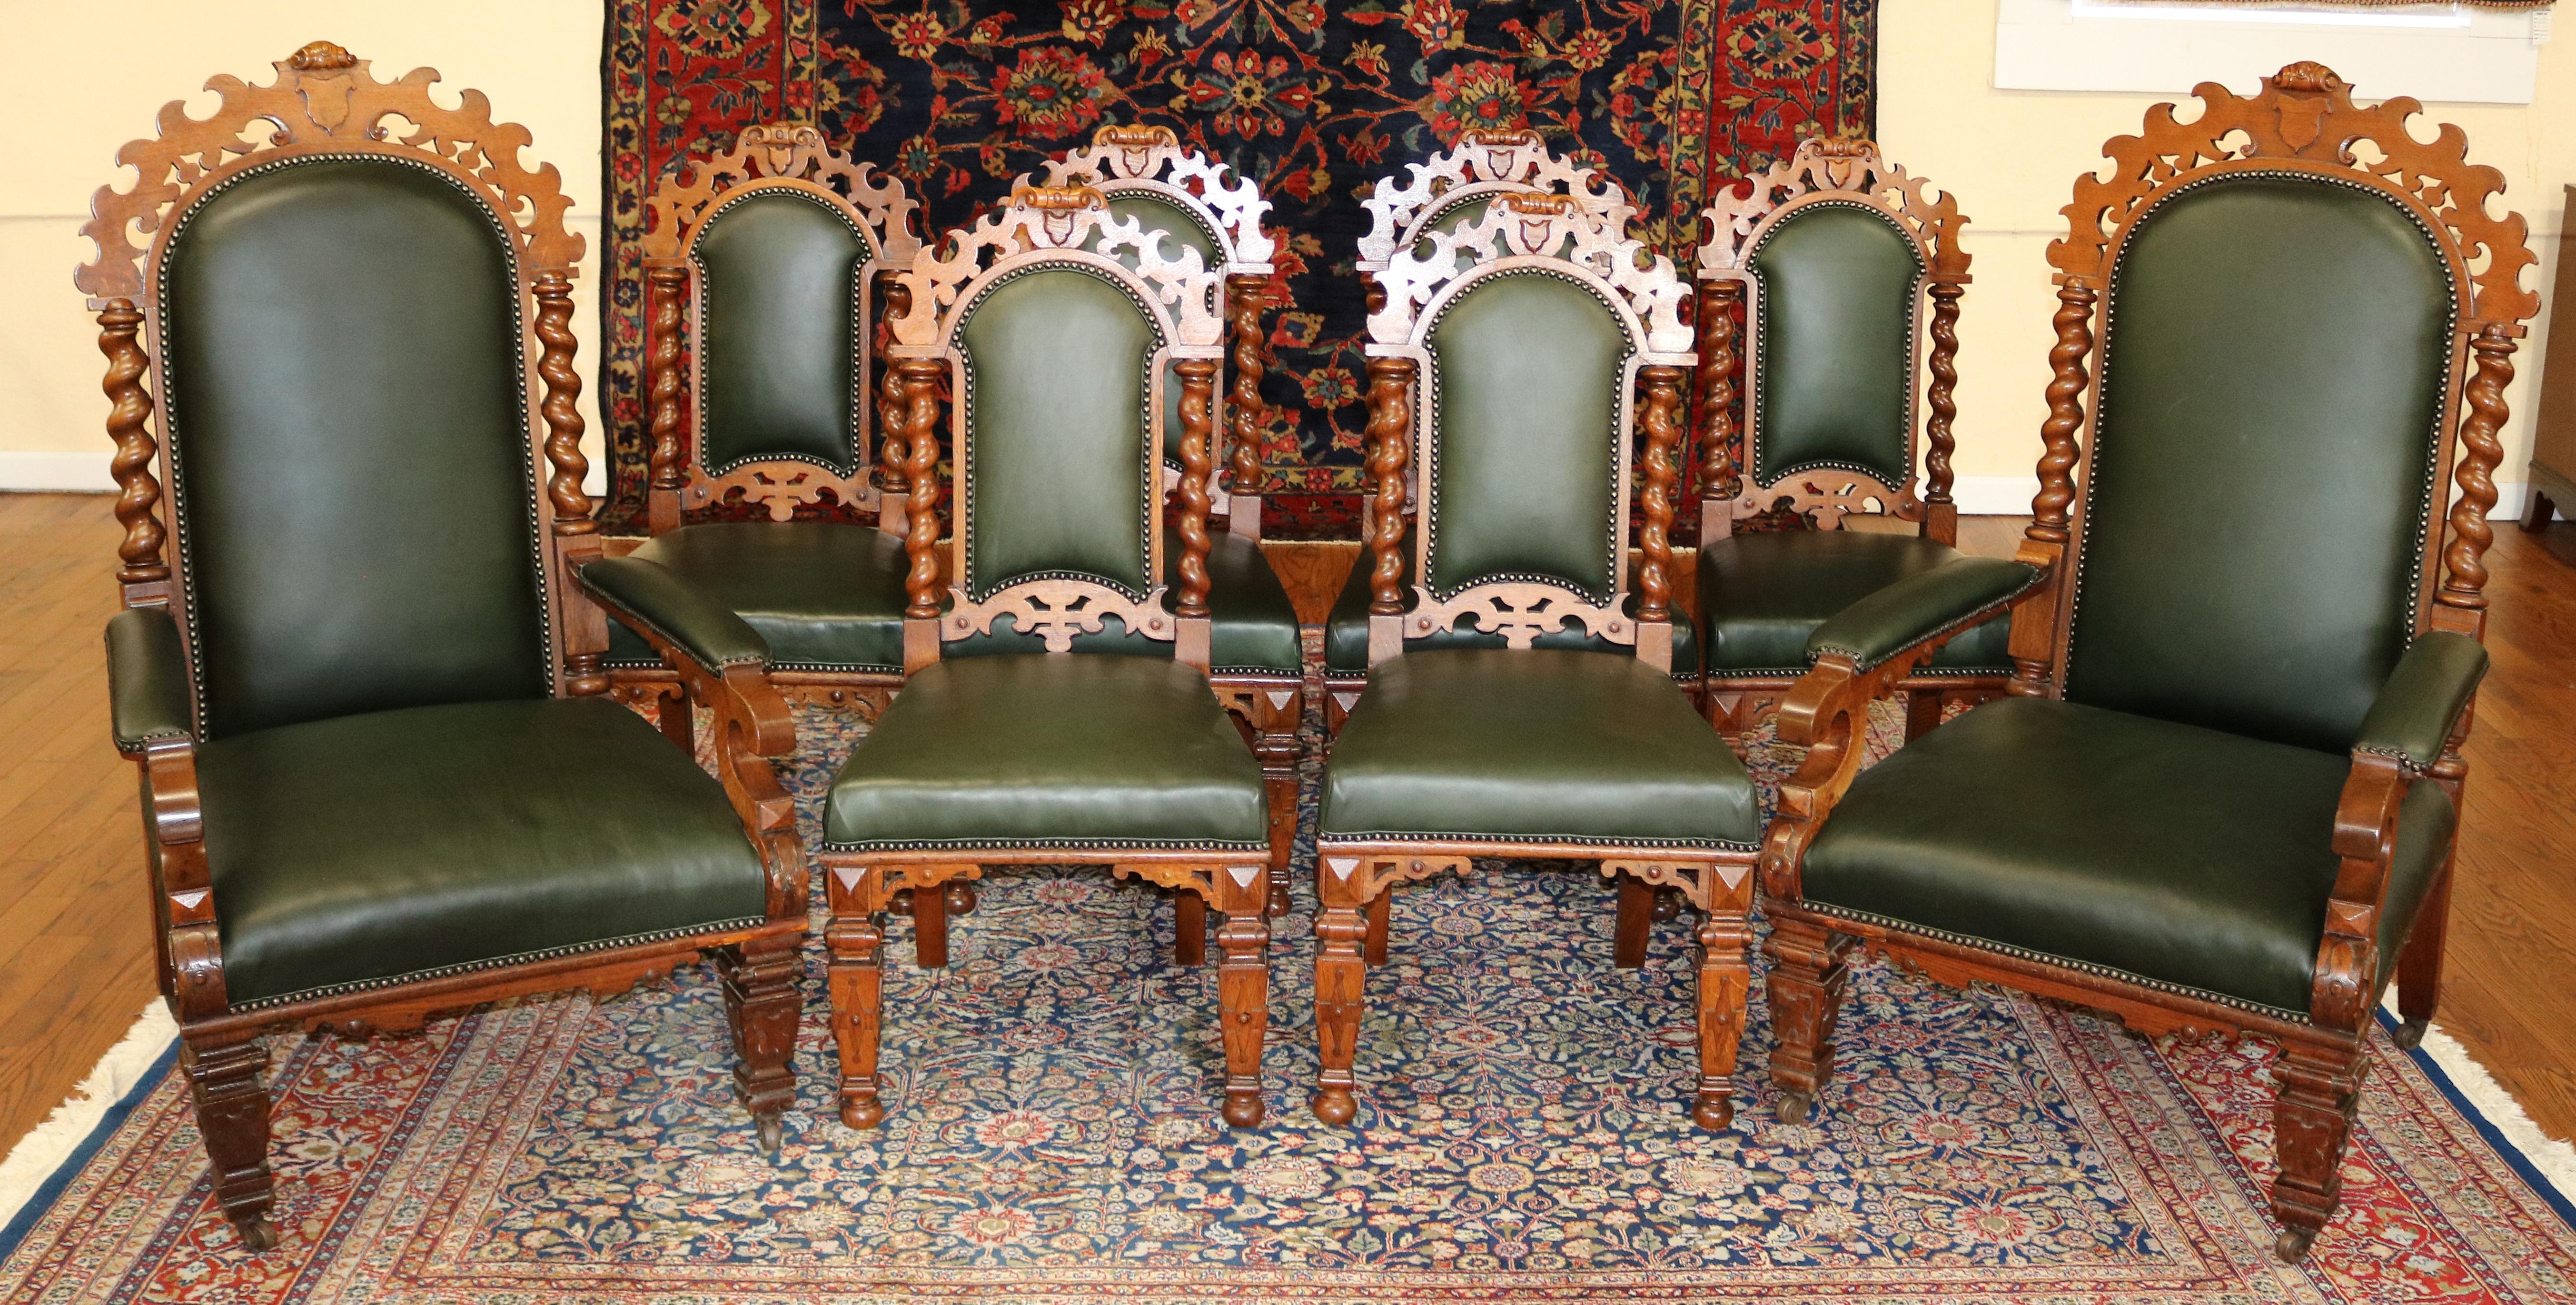 ​Set of 8 19th Century Victorian Barley Twist Oak & Green Leather Dining Chairs

Dimensions : Arm Chairs - 49.25